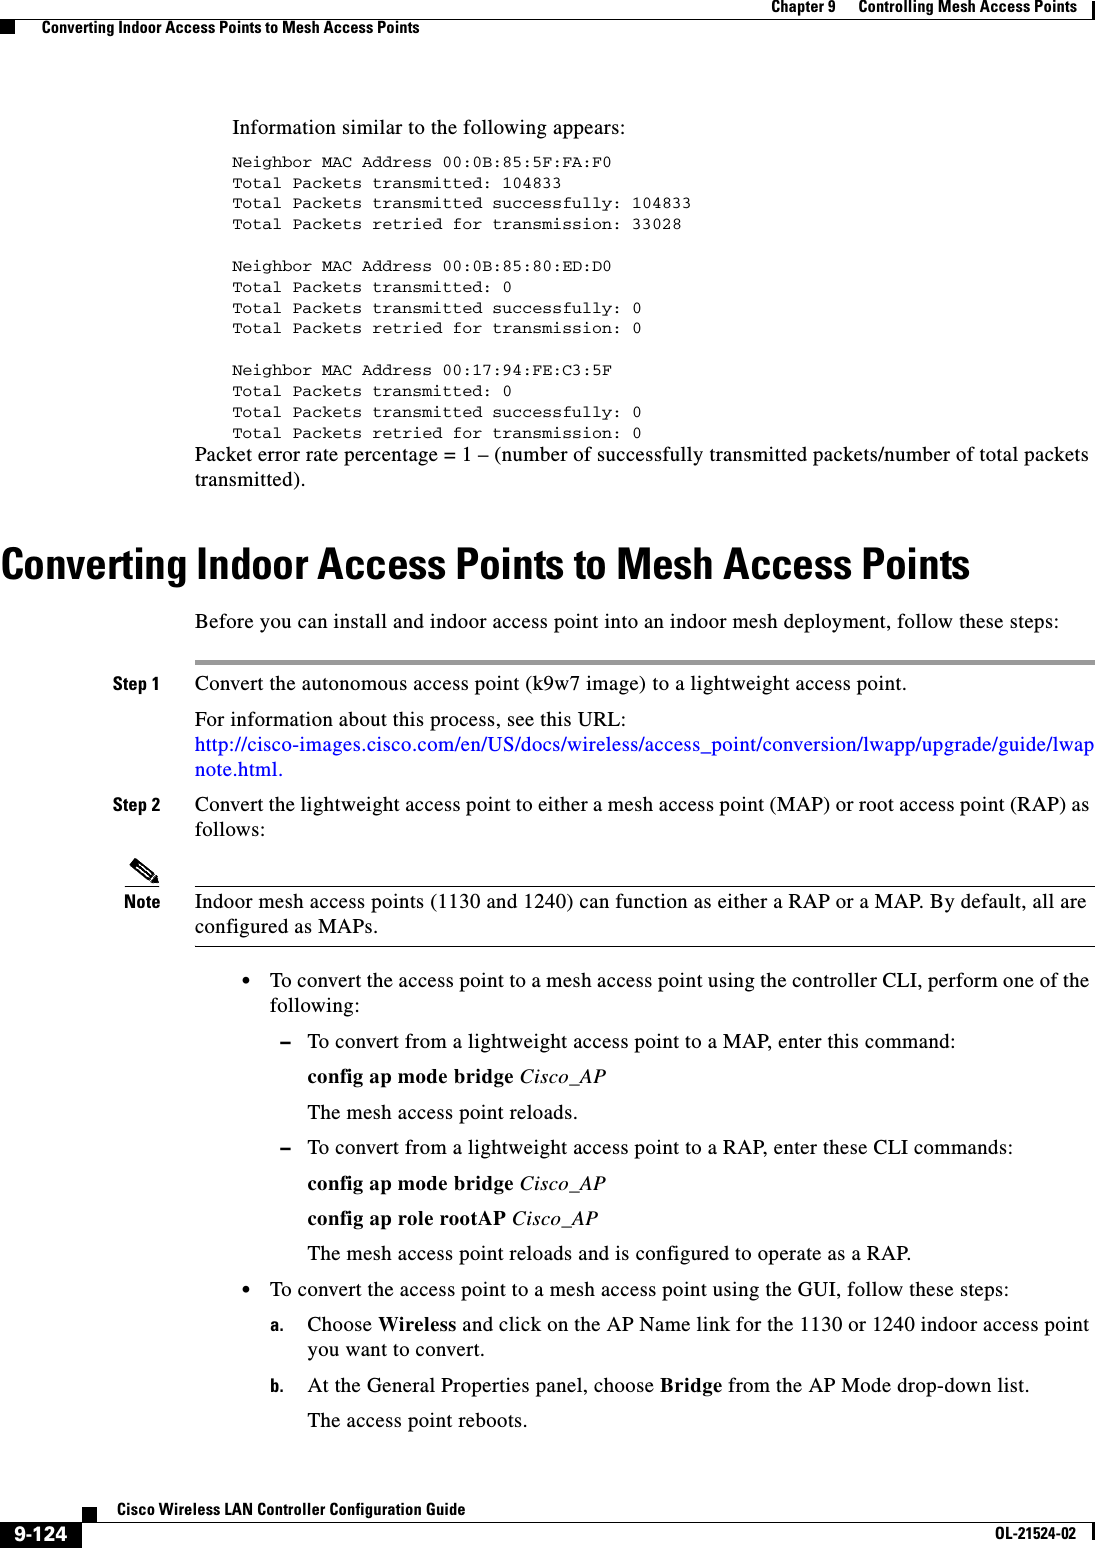  9-124Cisco Wireless LAN Controller Configuration GuideOL-21524-02Chapter 9      Controlling Mesh Access Points  Converting Indoor Access Points to Mesh Access PointsInformation similar to the following appears:Neighbor MAC Address 00:0B:85:5F:FA:F0Total Packets transmitted: 104833Total Packets transmitted successfully: 104833Total Packets retried for transmission: 33028Neighbor MAC Address 00:0B:85:80:ED:D0Total Packets transmitted: 0Total Packets transmitted successfully: 0Total Packets retried for transmission: 0Neighbor MAC Address 00:17:94:FE:C3:5FTotal Packets transmitted: 0Total Packets transmitted successfully: 0Total Packets retried for transmission: 0Packet error rate percentage = 1 – (number of successfully transmitted packets/number of total packets transmitted).Converting Indoor Access Points to Mesh Access PointsBefore you can install and indoor access point into an indoor mesh deployment, follow these steps:Step 1 Convert the autonomous access point (k9w7 image) to a lightweight access point.For information about this process, see this URL: http://cisco-images.cisco.com/en/US/docs/wireless/access_point/conversion/lwapp/upgrade/guide/lwapnote.html.Step 2 Convert the lightweight access point to either a mesh access point (MAP) or root access point (RAP) as follows:Note Indoor mesh access points (1130 and 1240) can function as either a RAP or a MAP. By default, all are configured as MAPs.   • To convert the access point to a mesh access point using the controller CLI, perform one of the following: –To convert from a lightweight access point to a MAP, enter this command:config ap mode bridge Cisco_APThe mesh access point reloads. –To convert from a lightweight access point to a RAP, enter these CLI commands:config ap mode bridge Cisco_AP config ap role rootAP Cisco_AP The mesh access point reloads and is configured to operate as a RAP.  • To convert the access point to a mesh access point using the GUI, follow these steps:a. Choose Wireless and click on the AP Name link for the 1130 or 1240 indoor access point you want to convert.b. At the General Properties panel, choose Bridge from the AP Mode drop-down list.The access point reboots.